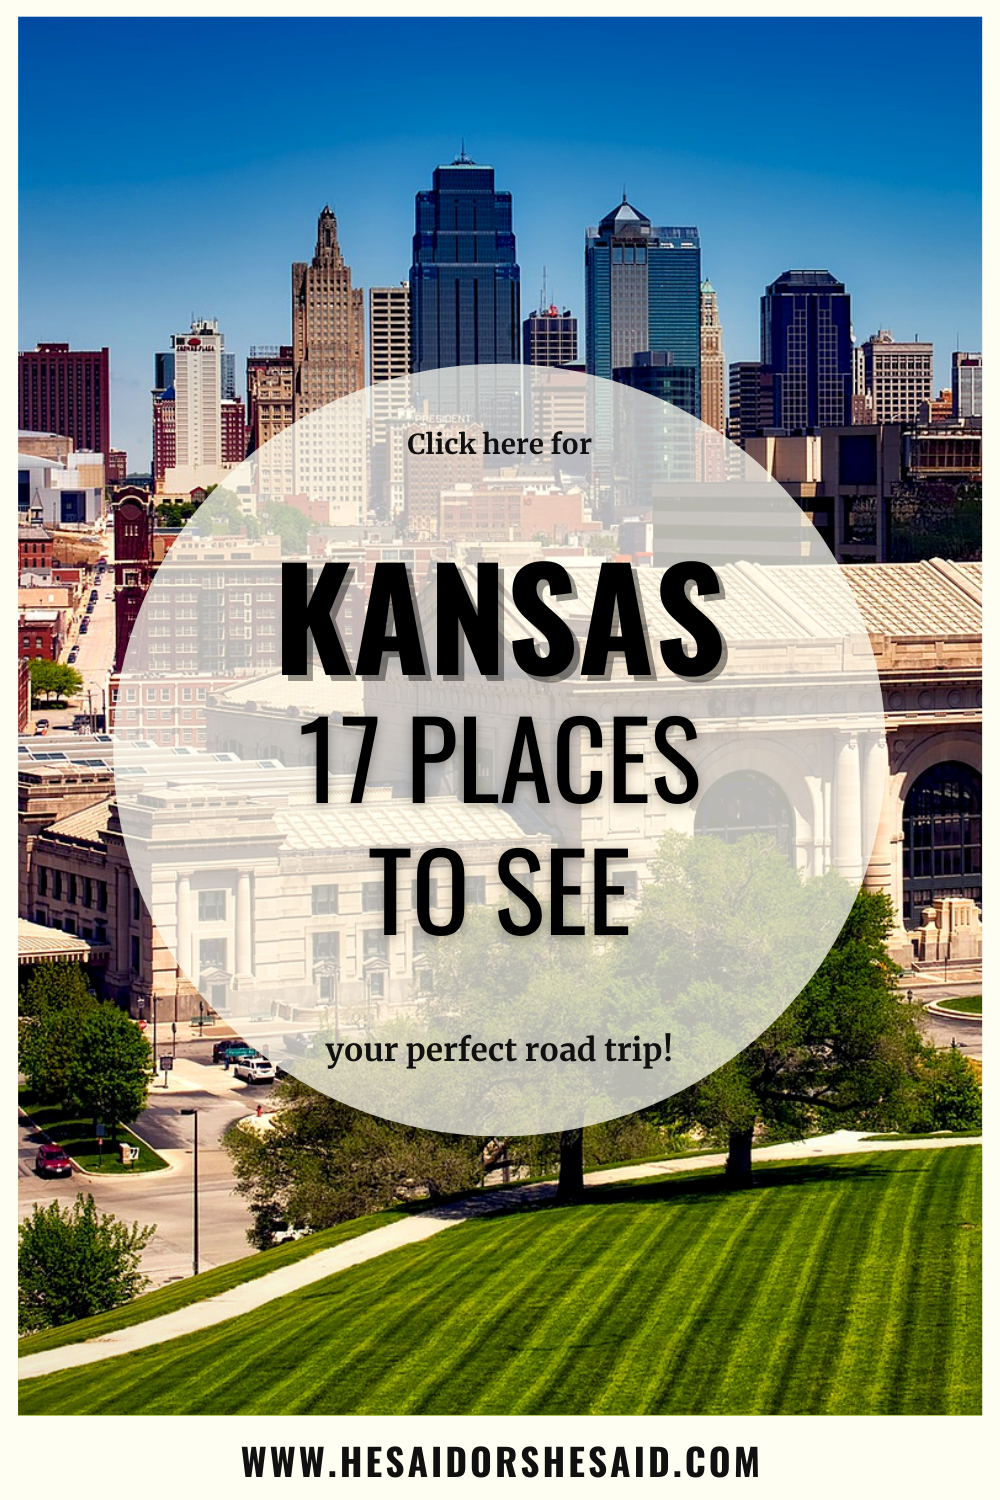 17 Places to see in Kansas by hesaidorshesaid